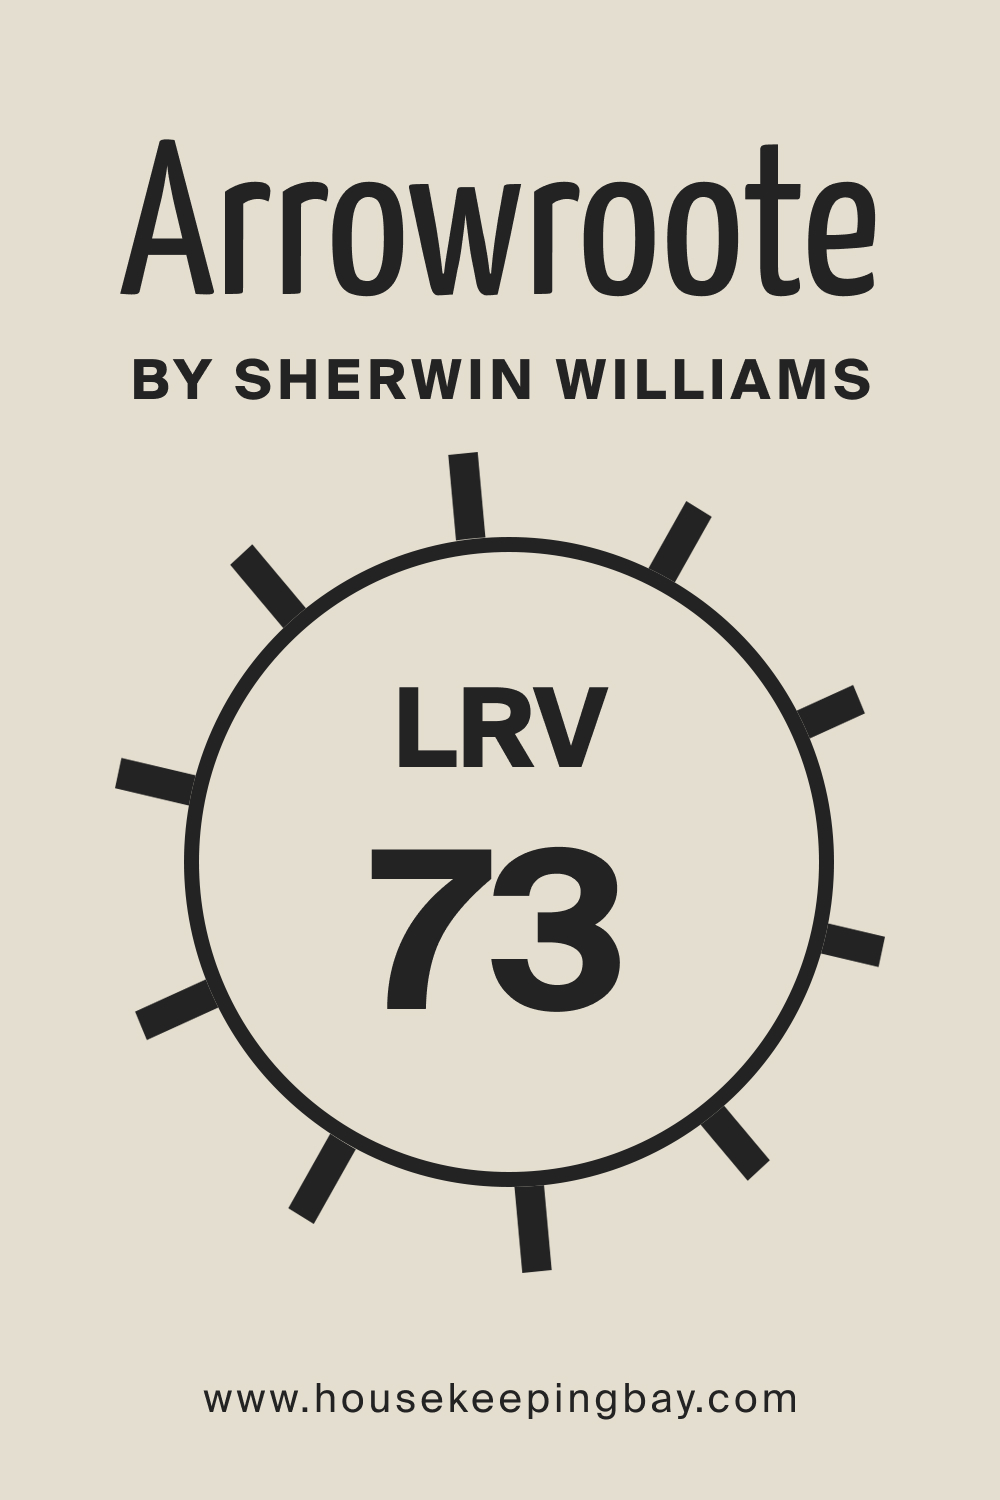 SW 9502 Arrowroote by Sherwin Williams. LRV 73